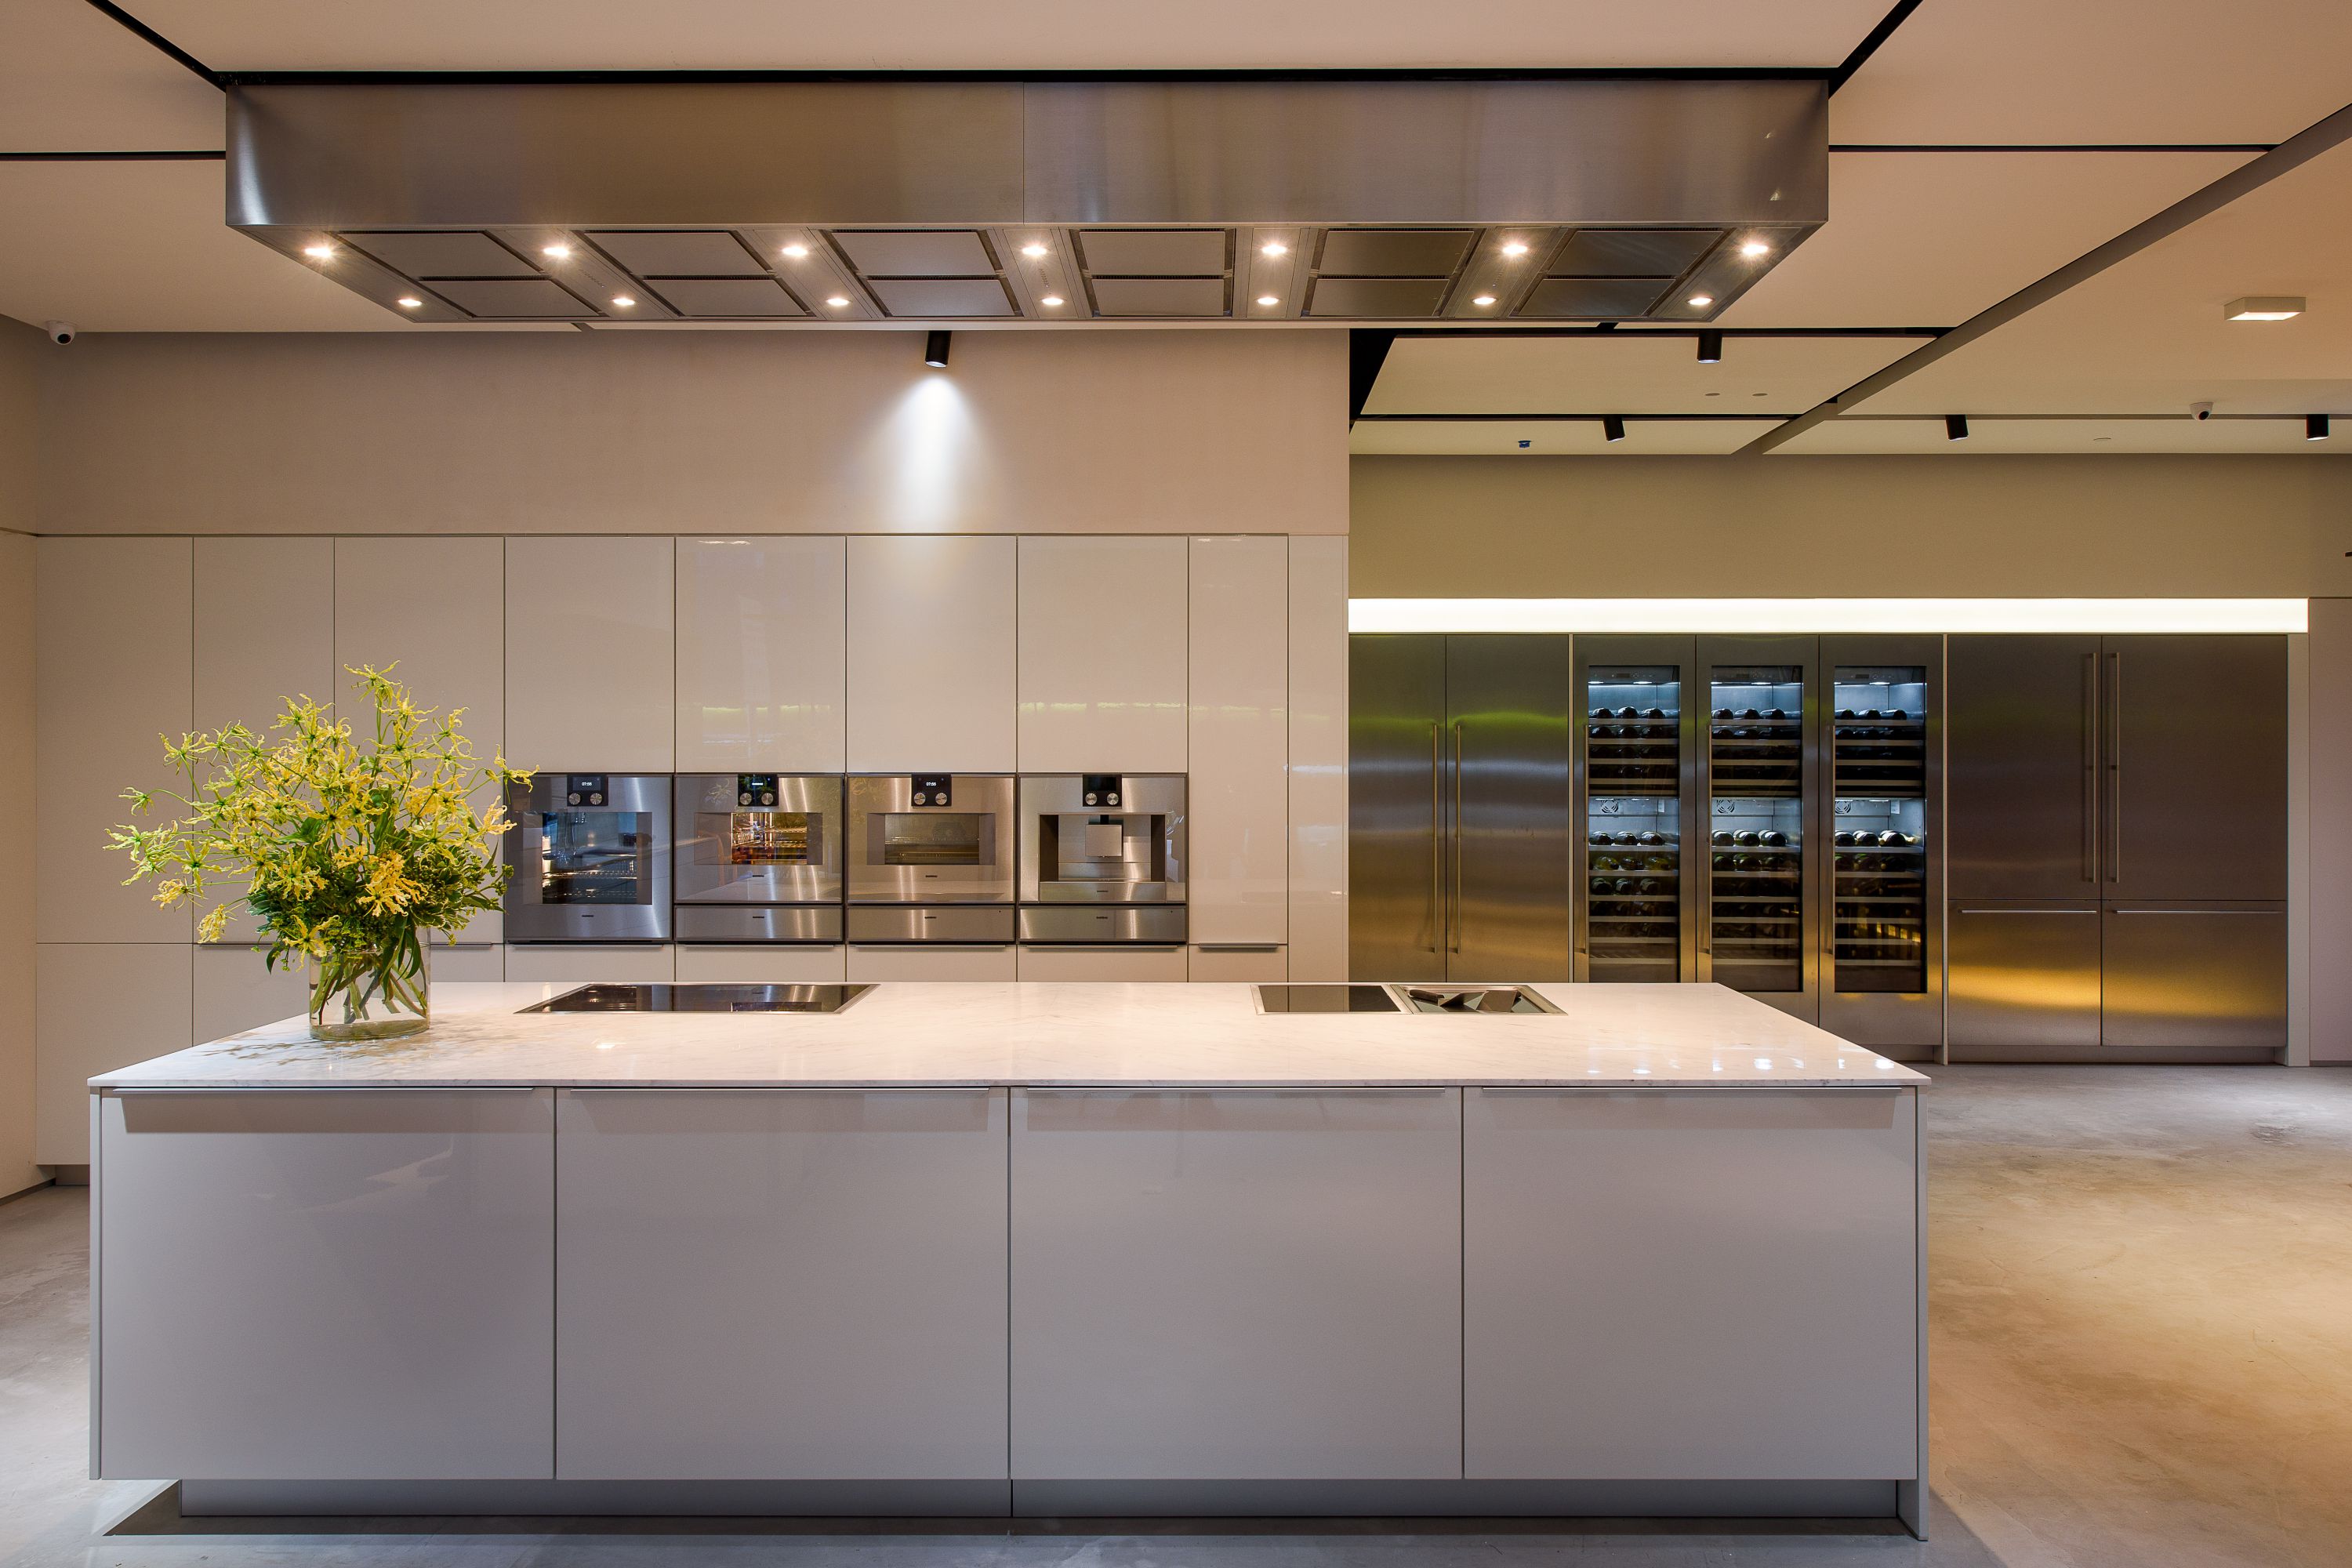 A slick new temple for luxury kitchenware opens in Causeway Bay